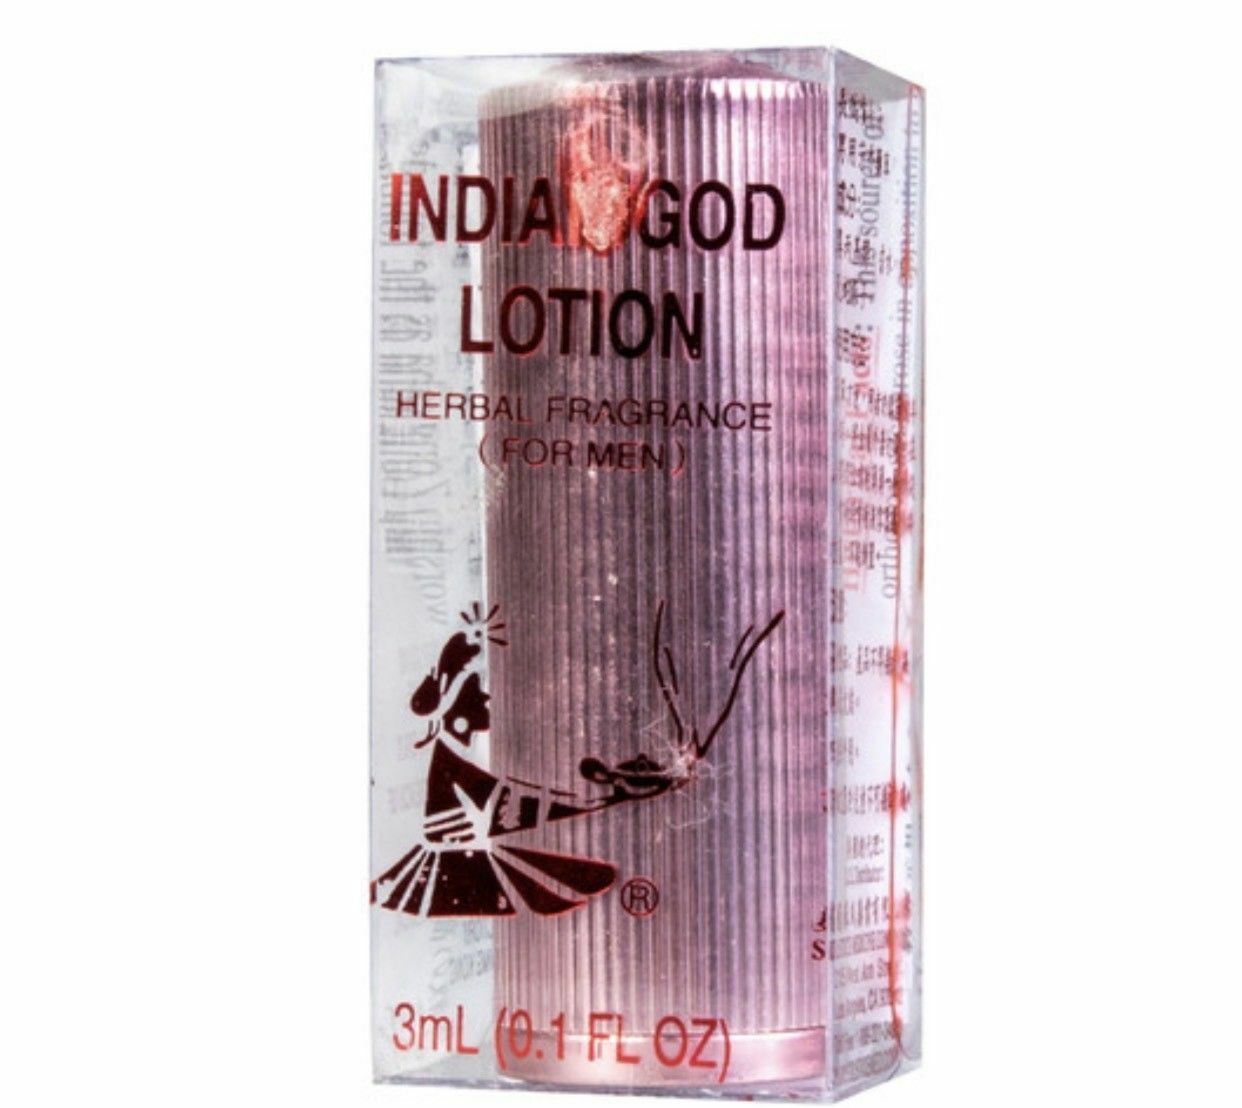 1 Pcs Indian God Lotion Sex Delay Spray Herbal For Male 3ml01 Oz Icommerce On Web 